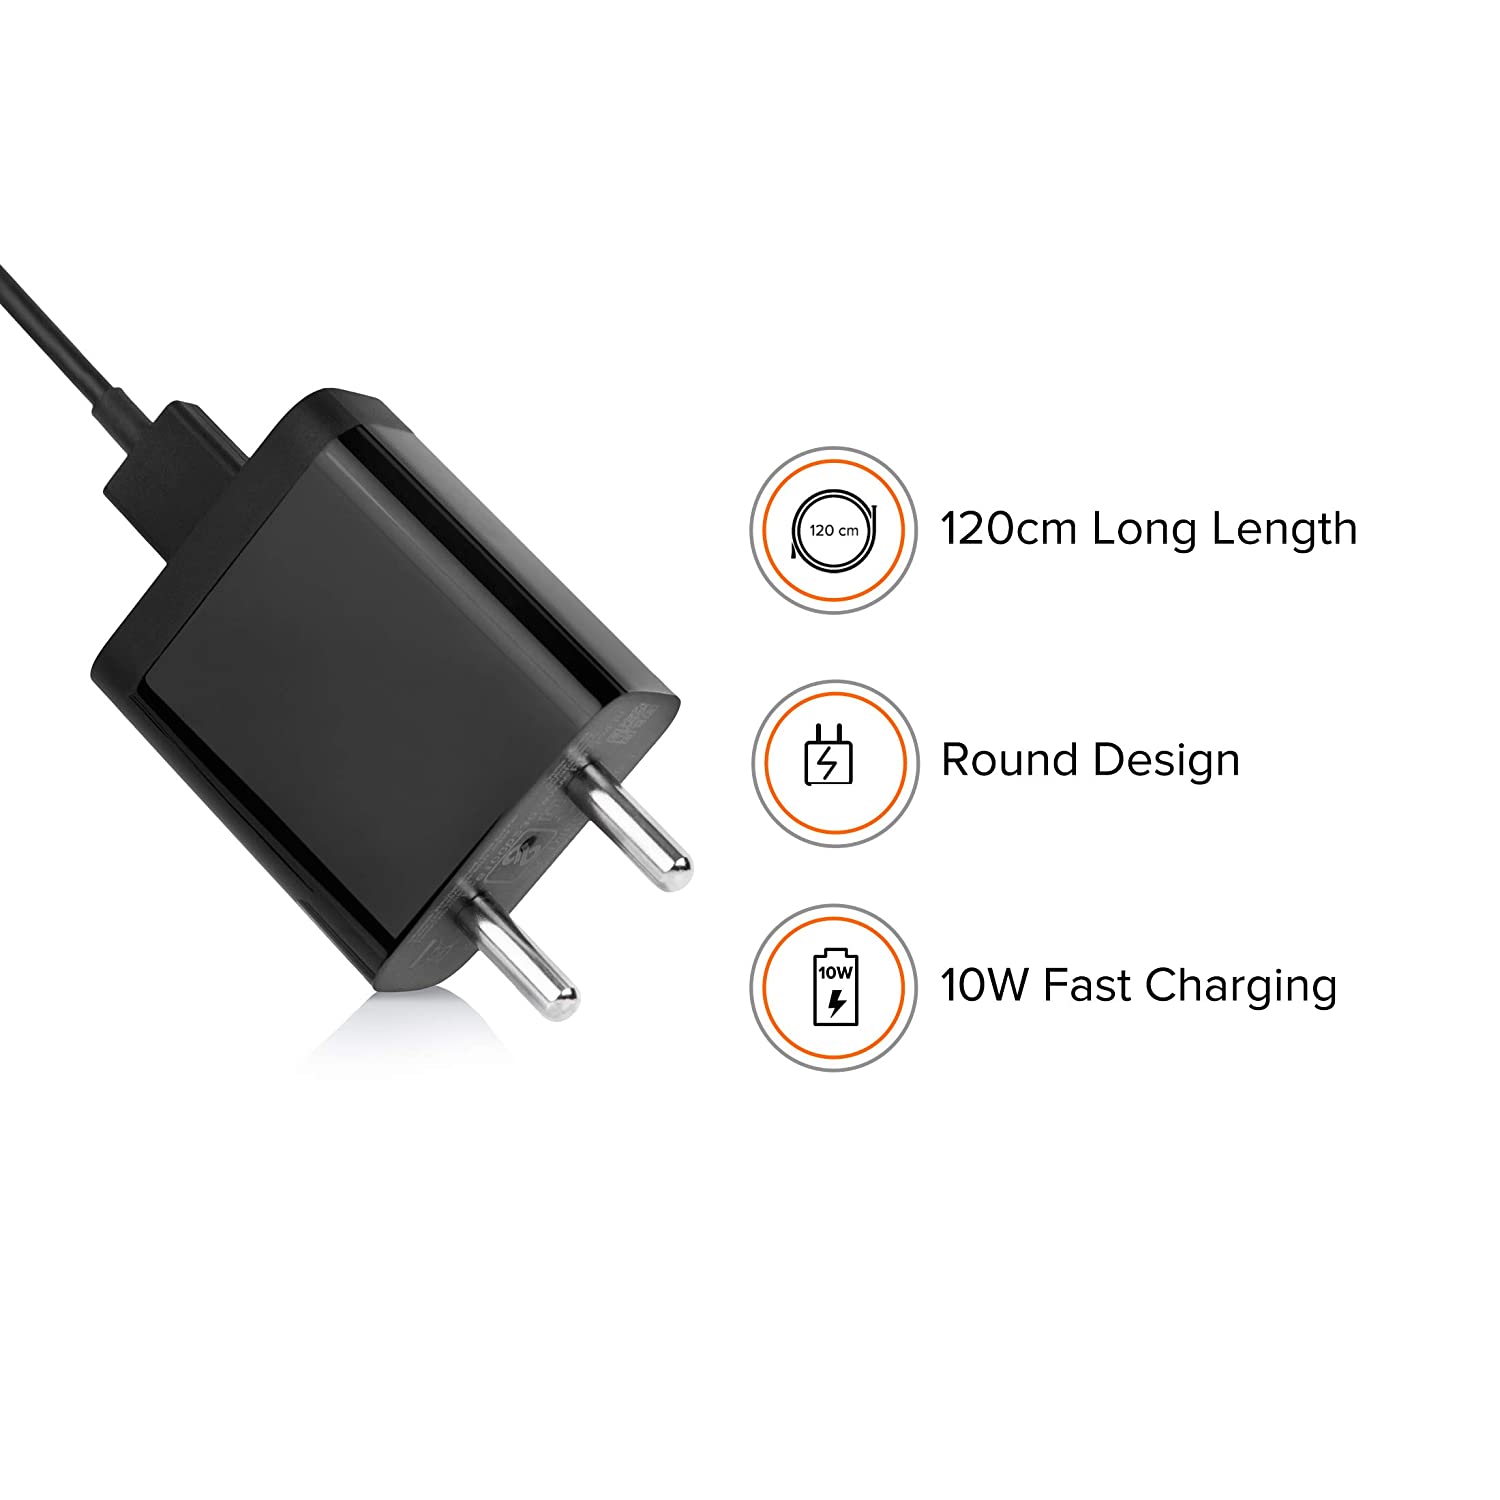 Mi 2A 10W Charger with Cable (1.2 Meter, Black) MRP 599/-